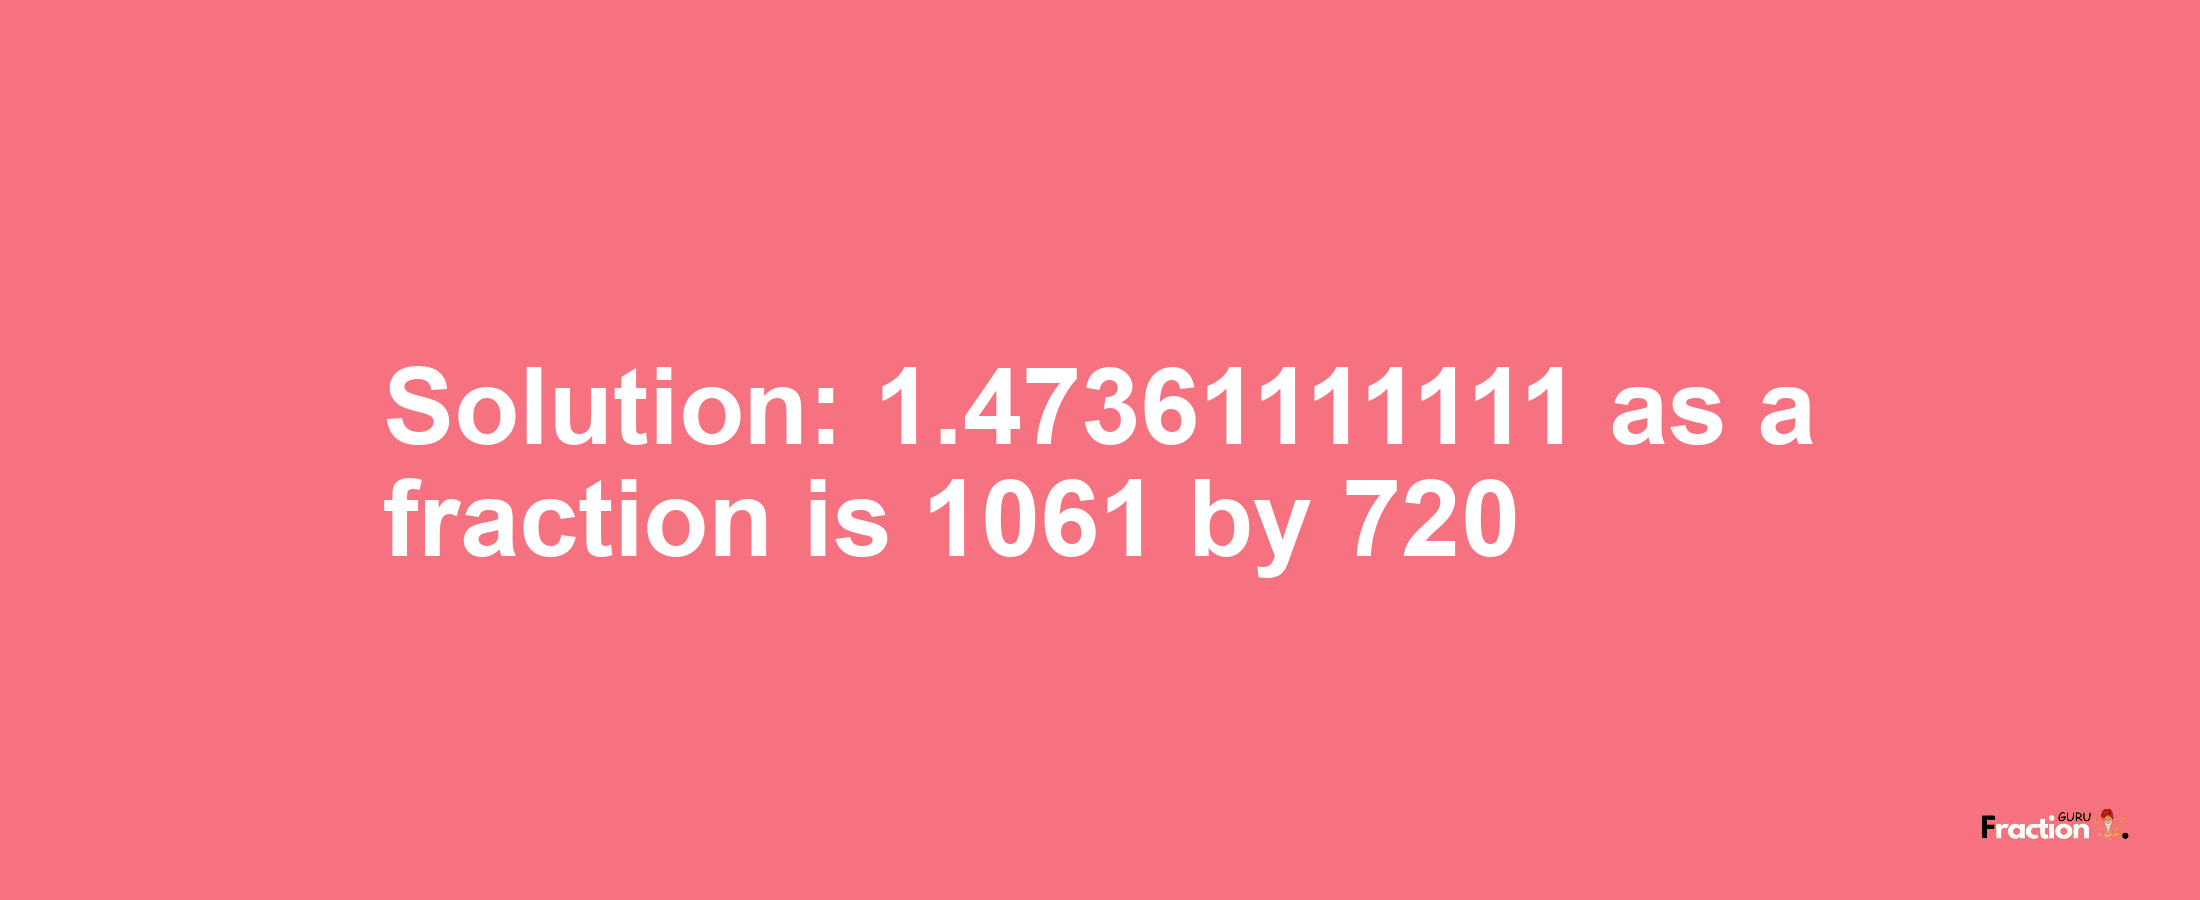 Solution:1.47361111111 as a fraction is 1061/720